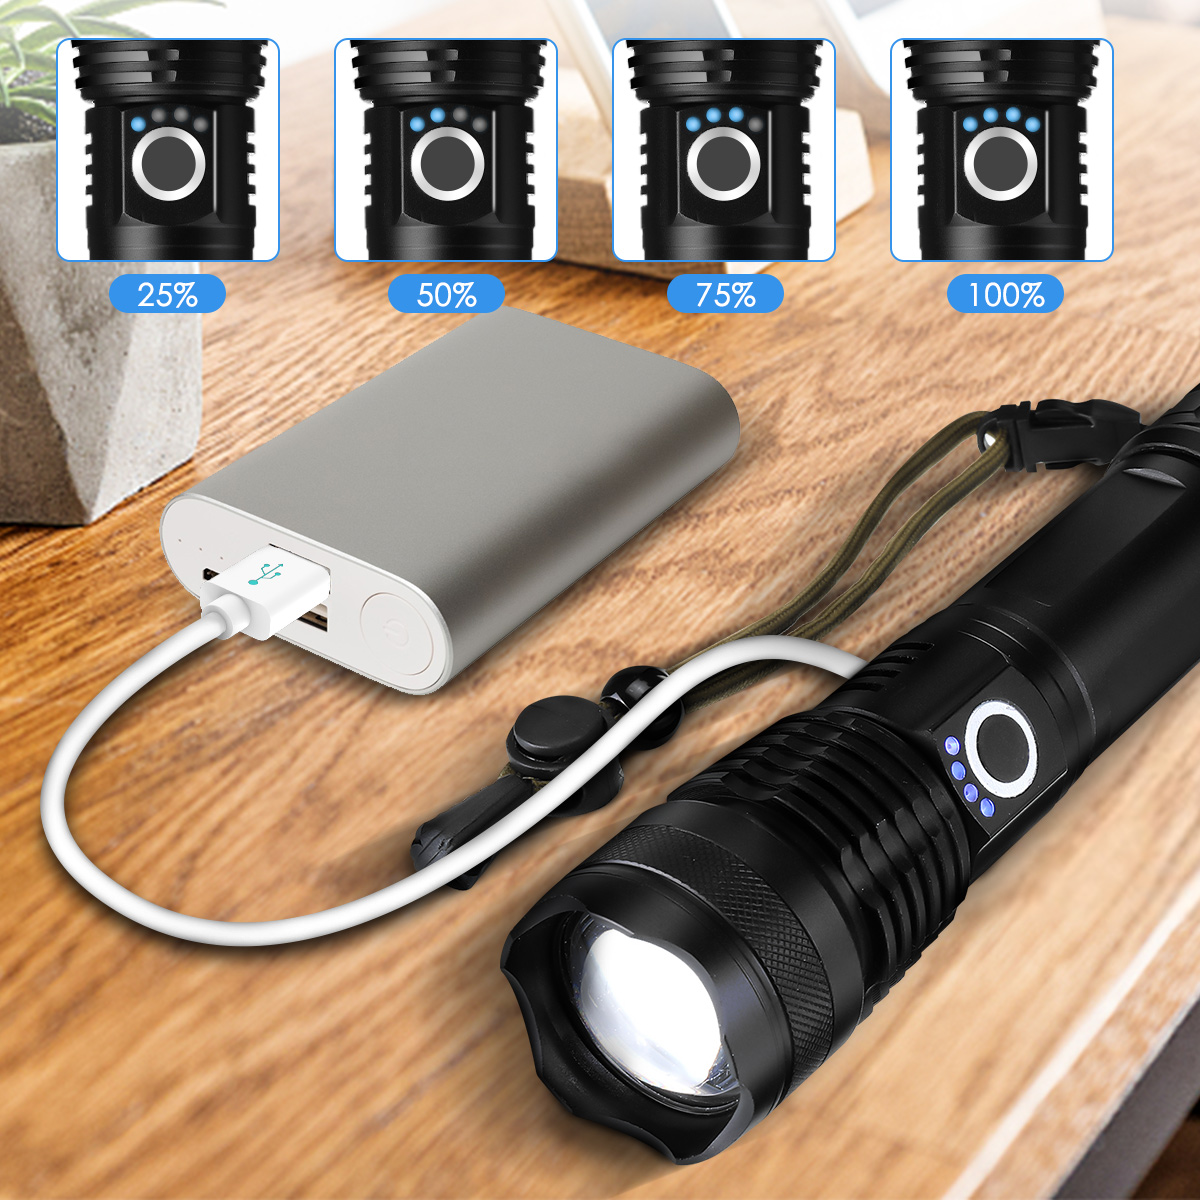 LIUMY-P50-LED-Zoomable-Flashlight-Set-with-26650-Battery-USB-Cable-Power-Display-USB-Rechargeable-LE-1819595-5